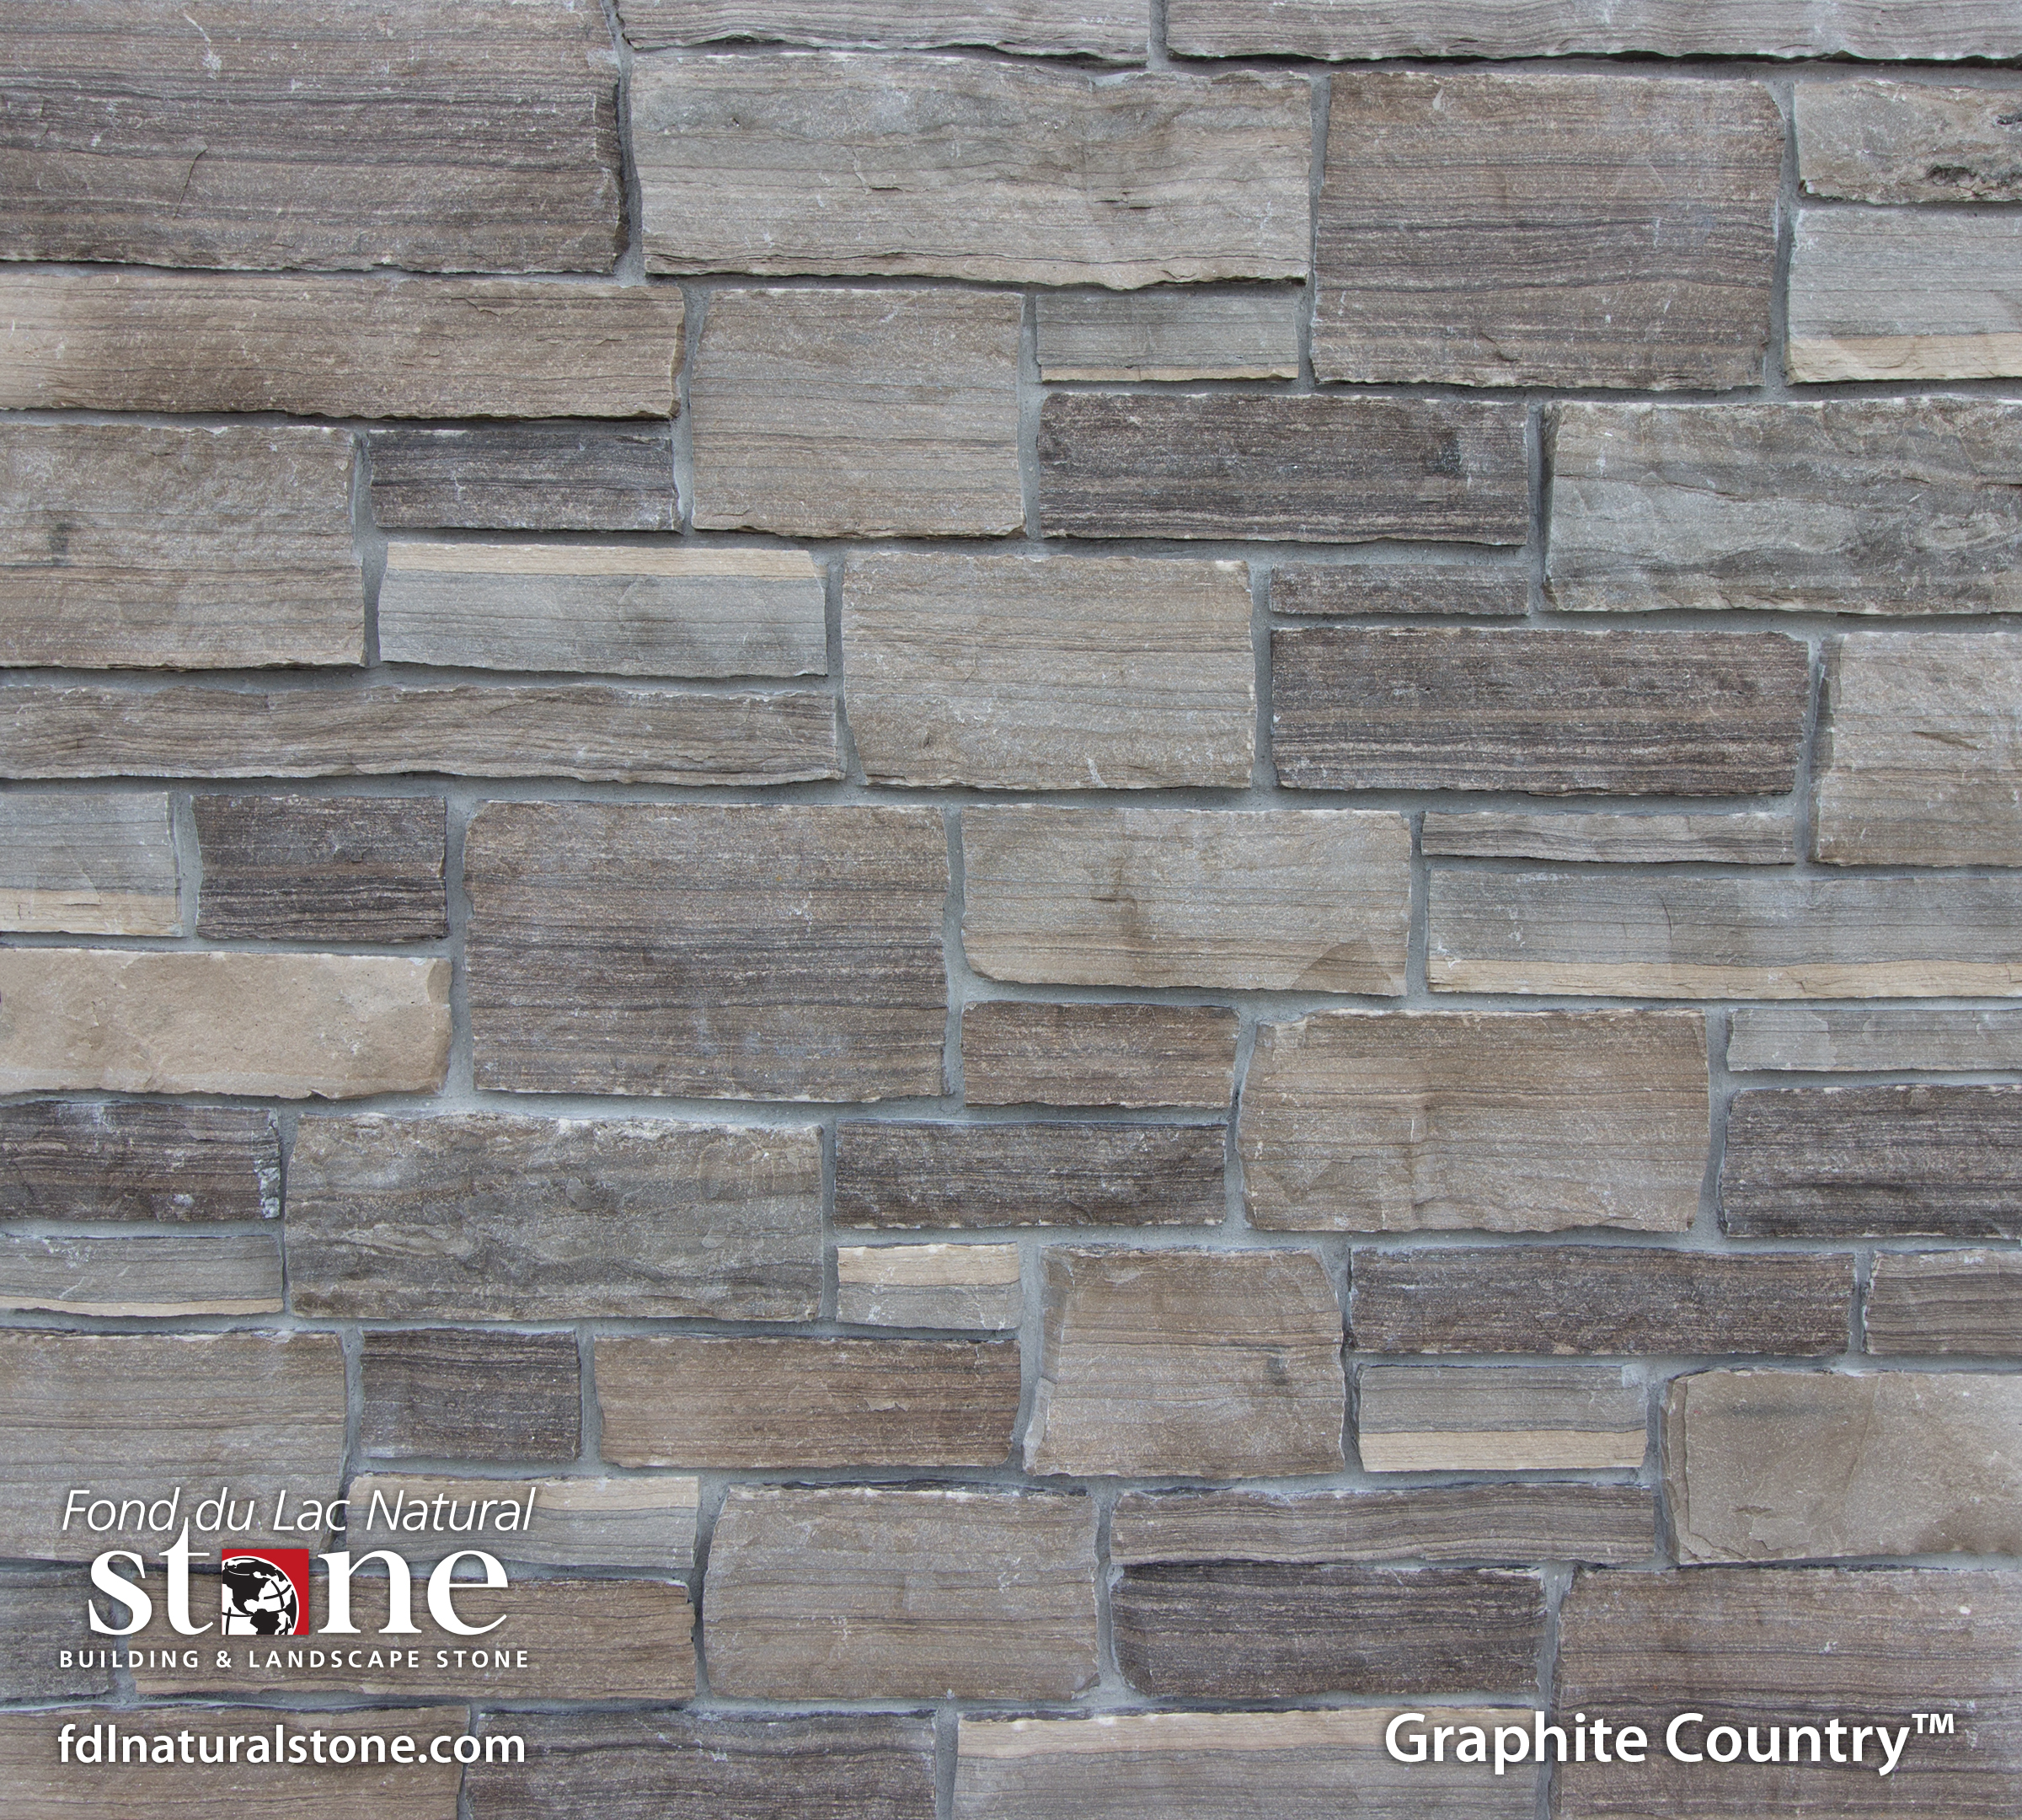 Graphite Country™ - Fond du Lac Natural Stone